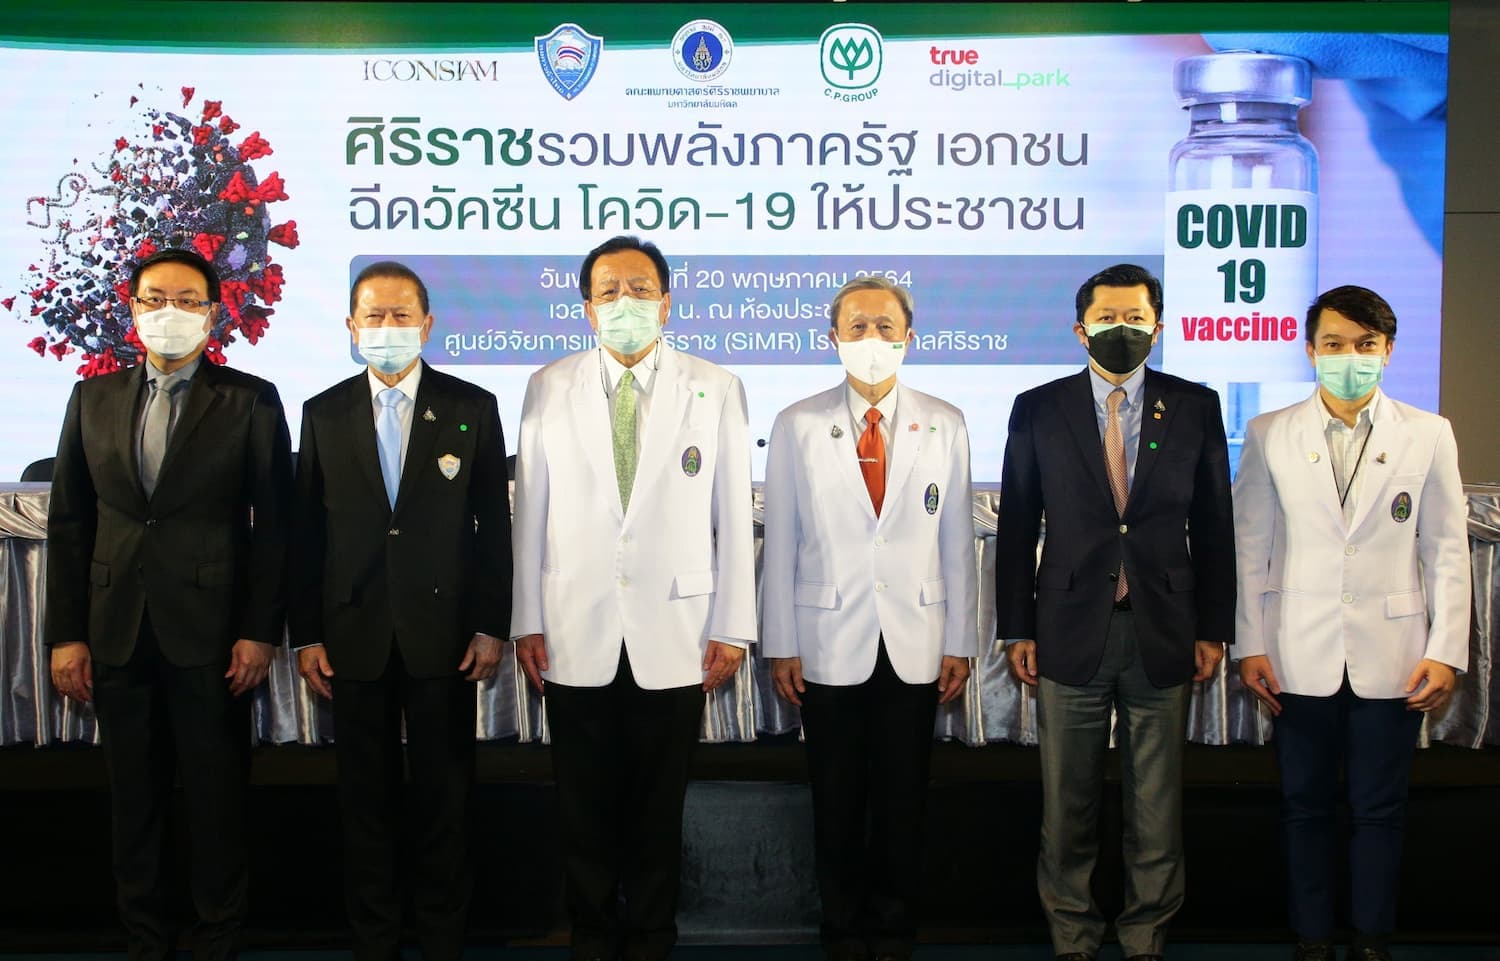 Siriraj joins private sector to inoculate people at ICONSIAM and True Digital Park